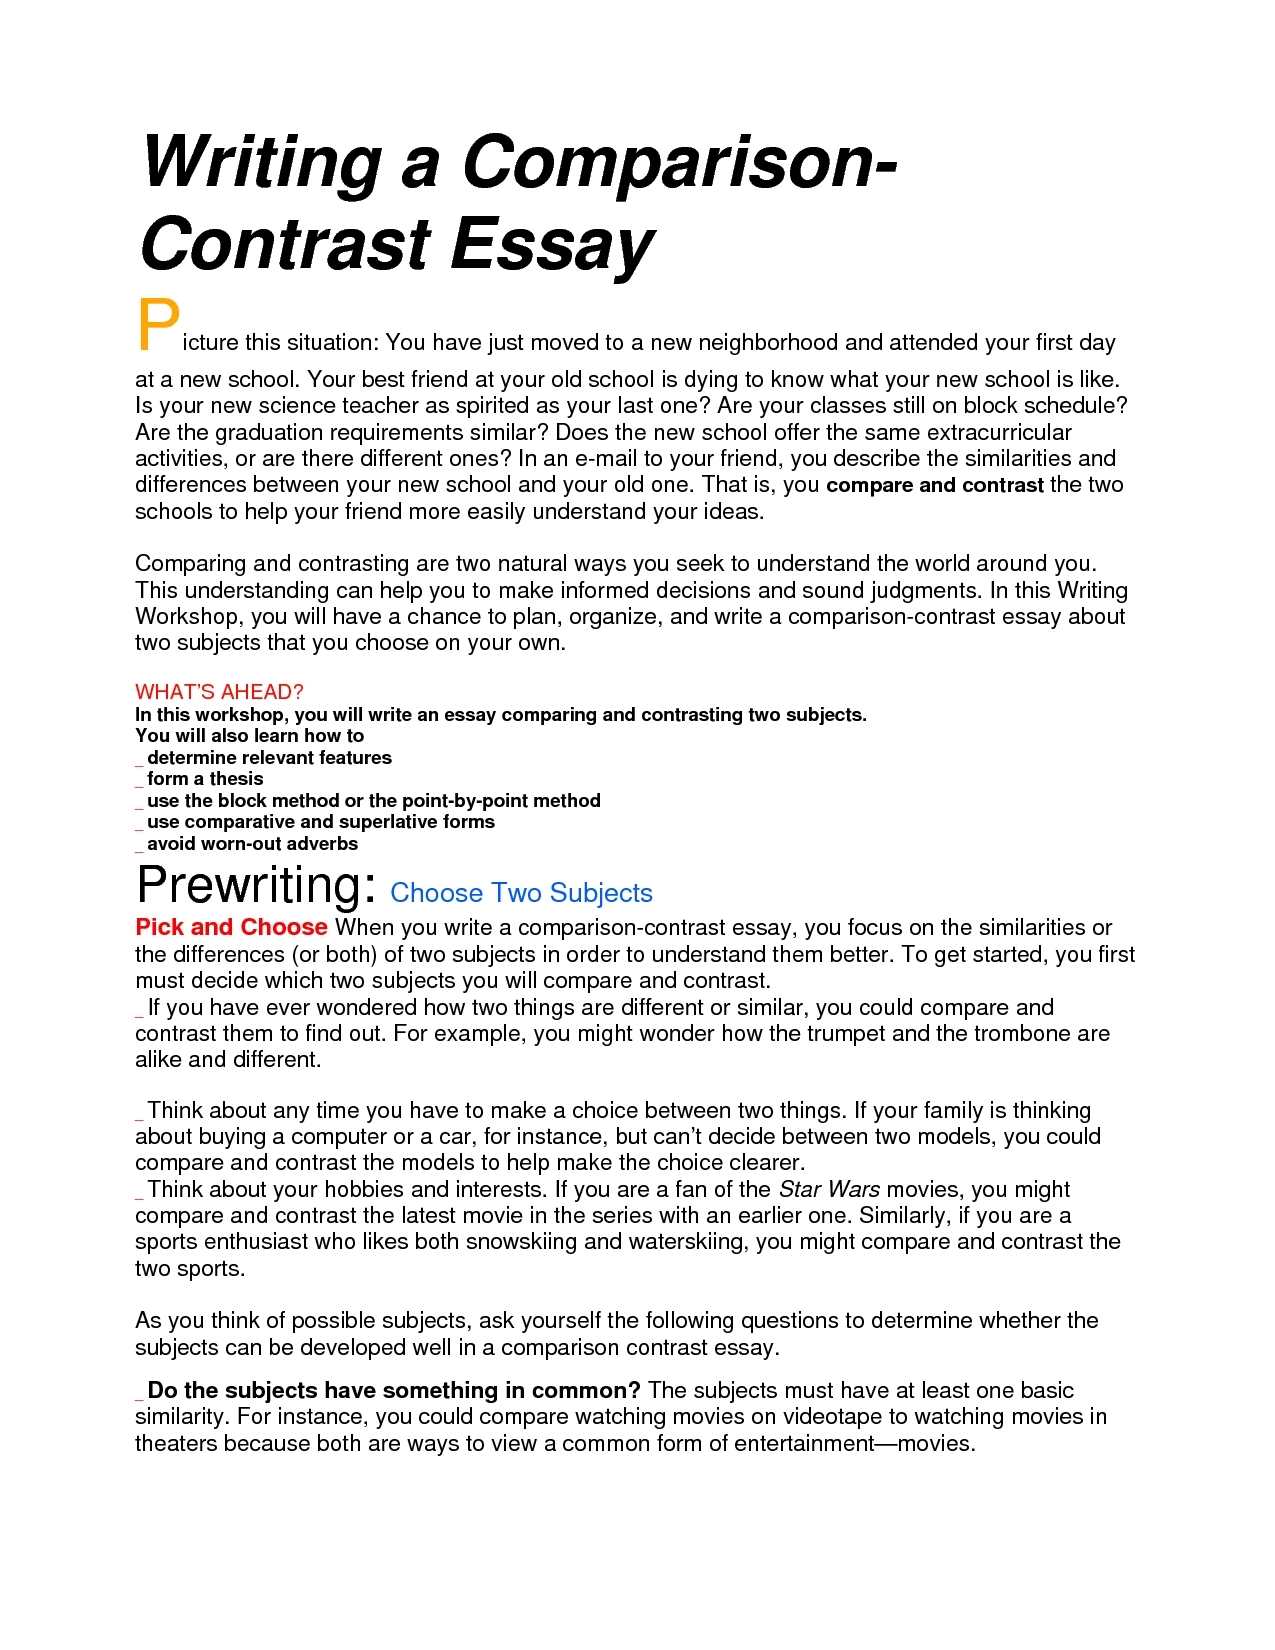 10 Unique Compare And Contrast Essay Ideas contrasting essay how to do a compare and contrast essay how to 2022